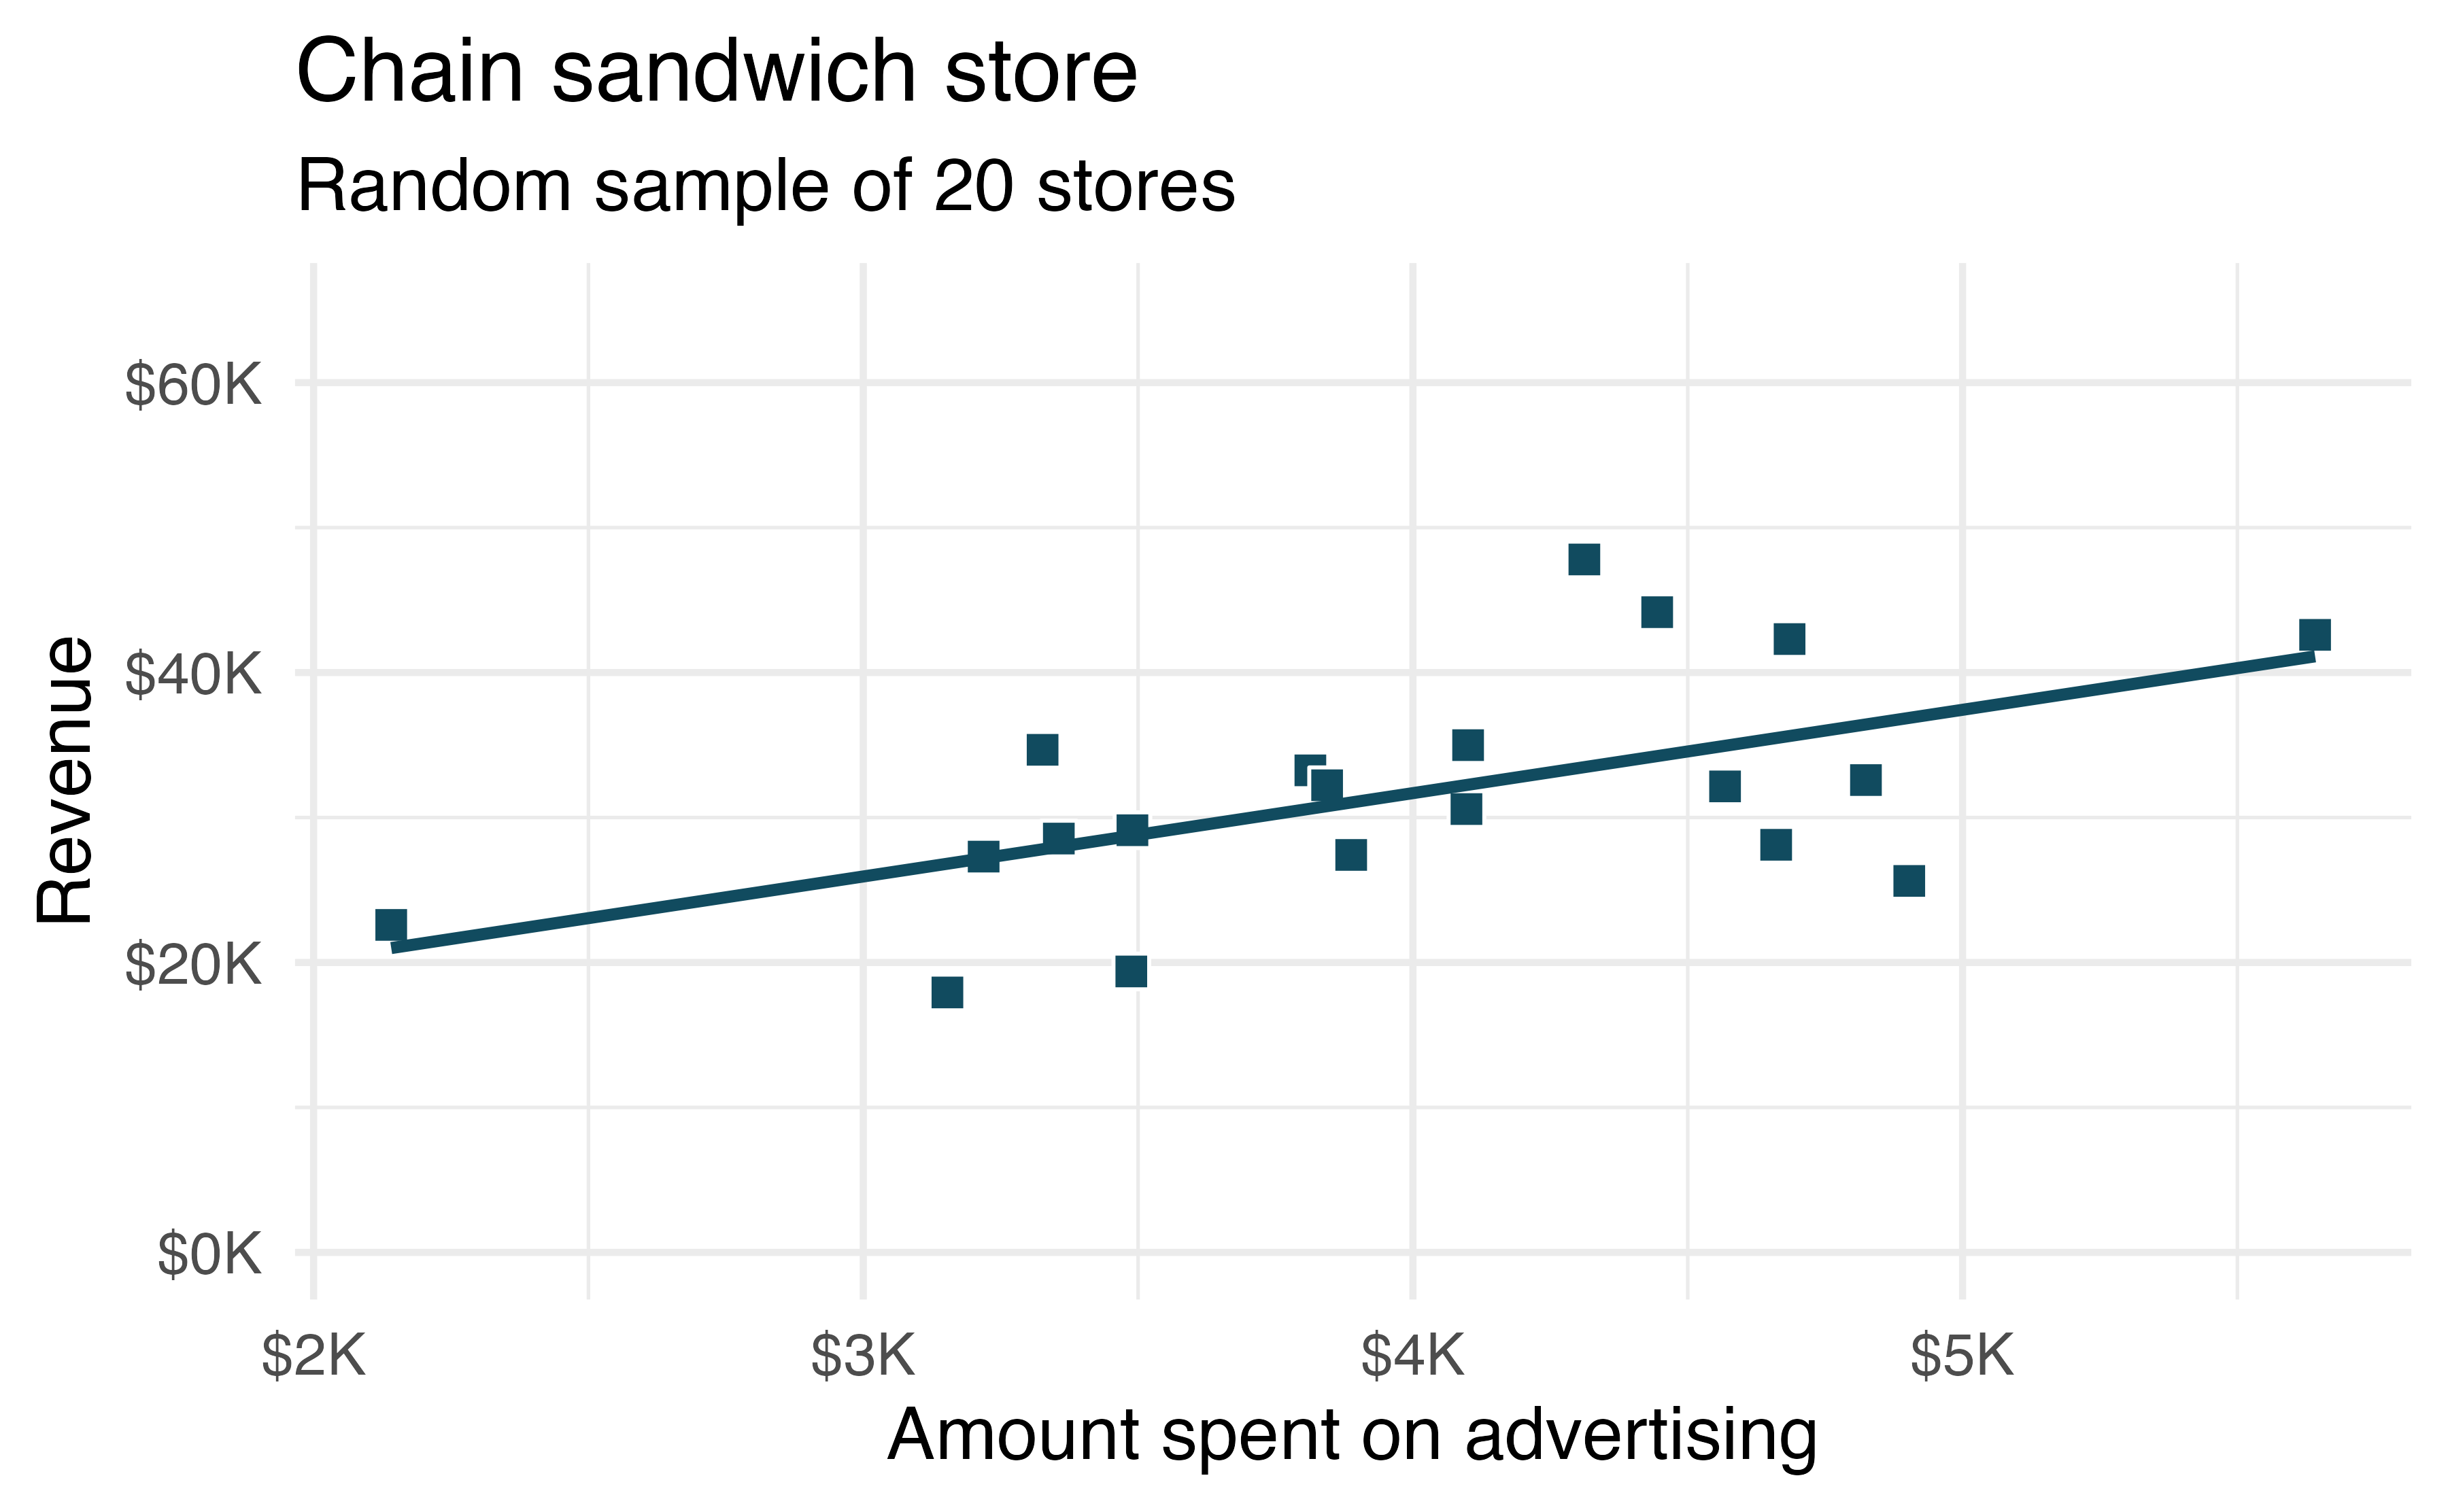 A random sample of 20 stores from the entire population. A linear trend between advertising and revenue continues to be observed.